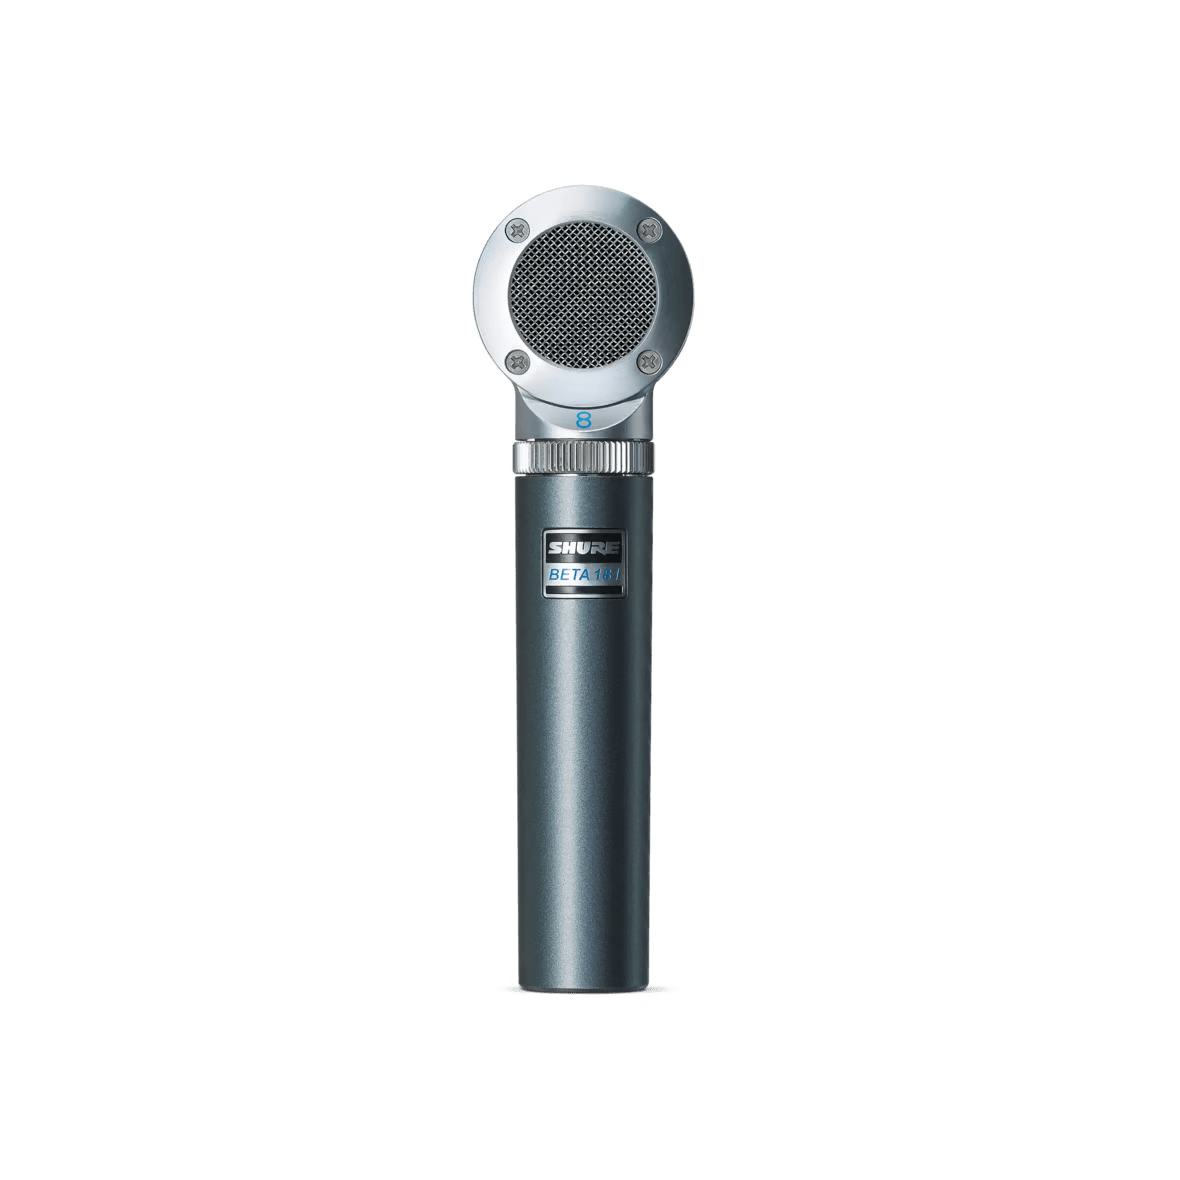 Shure BETA 181 Side-Address Condenser Microphone With Interchangeable Capsules